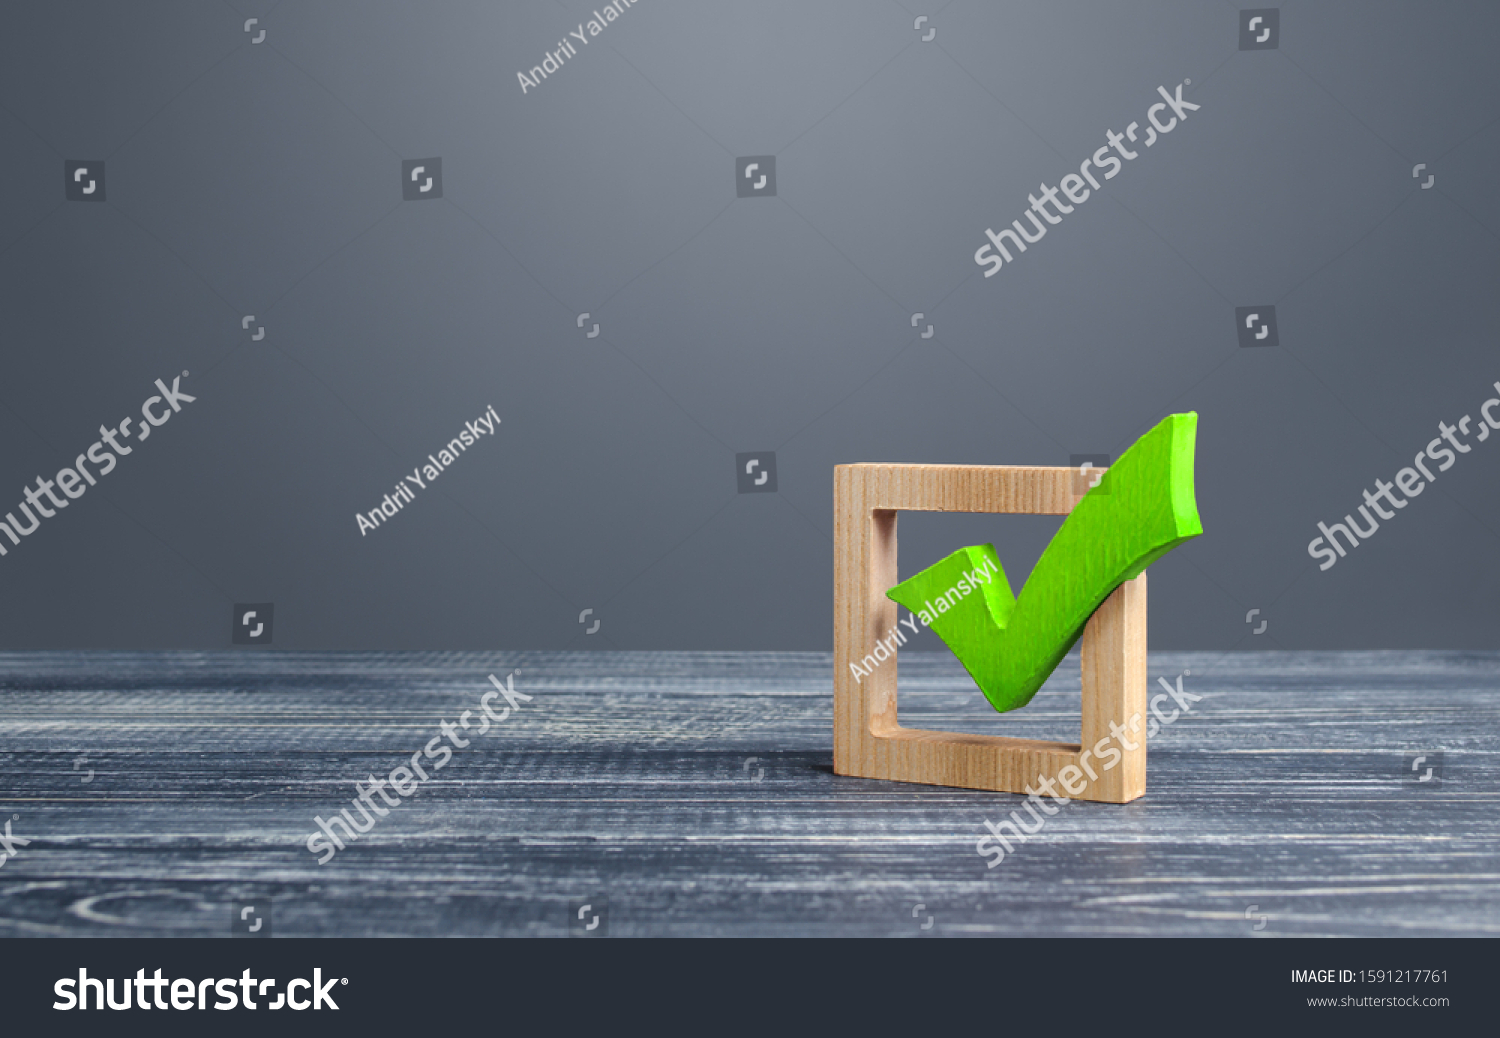 Green voting tick in a box. Checkbox. Democratic elections, referendum. The right to choose, change of power. Checklist for verification and self-discipline. Necessary quality criteria approval symbol #1591217761